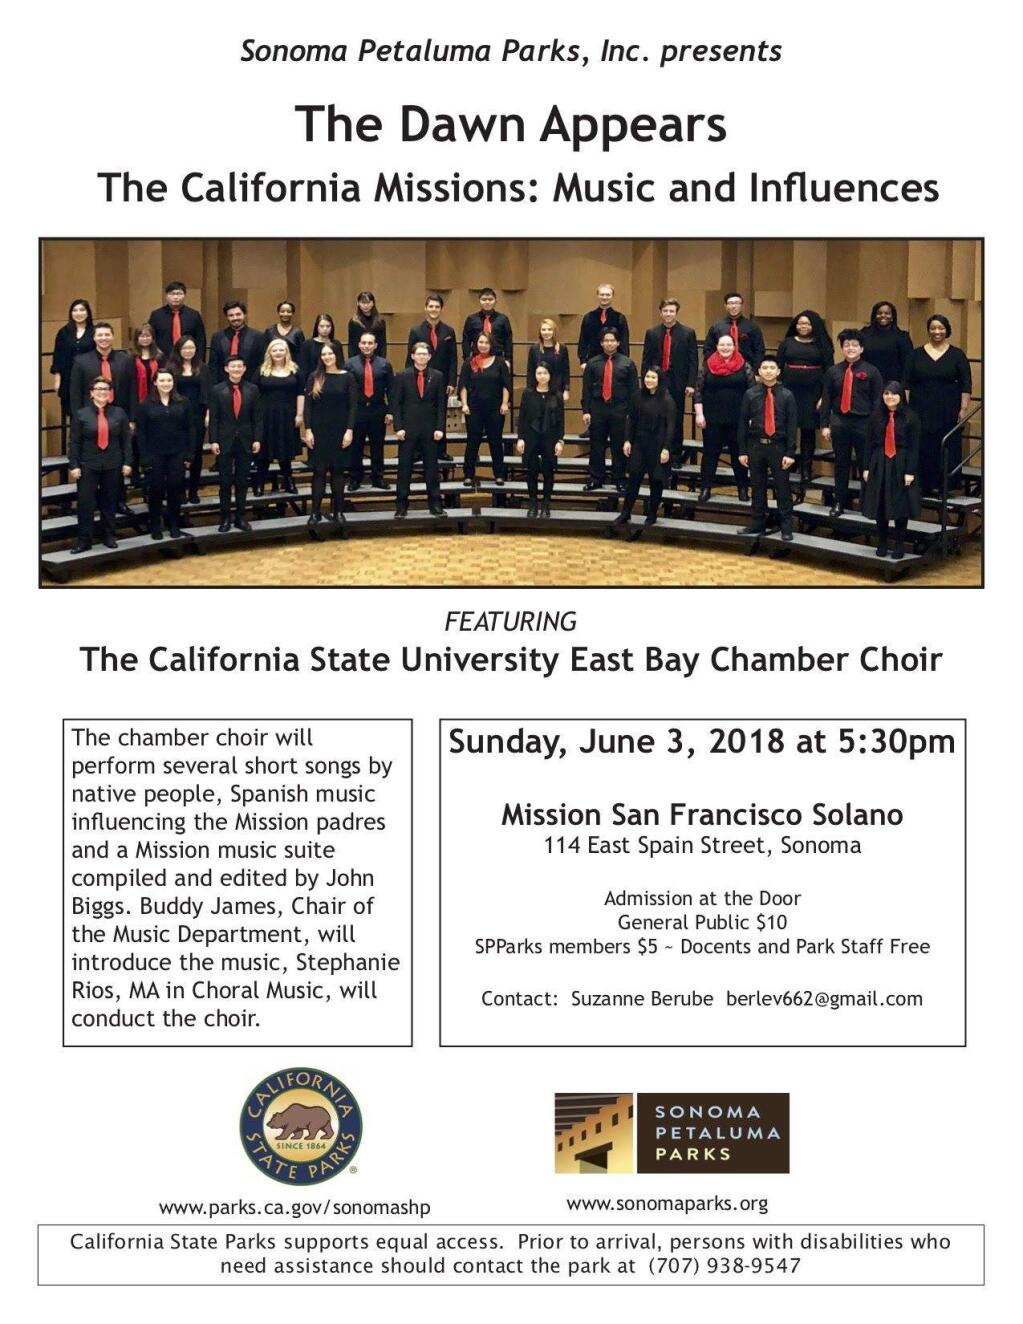 The flyer for the Mission concert.